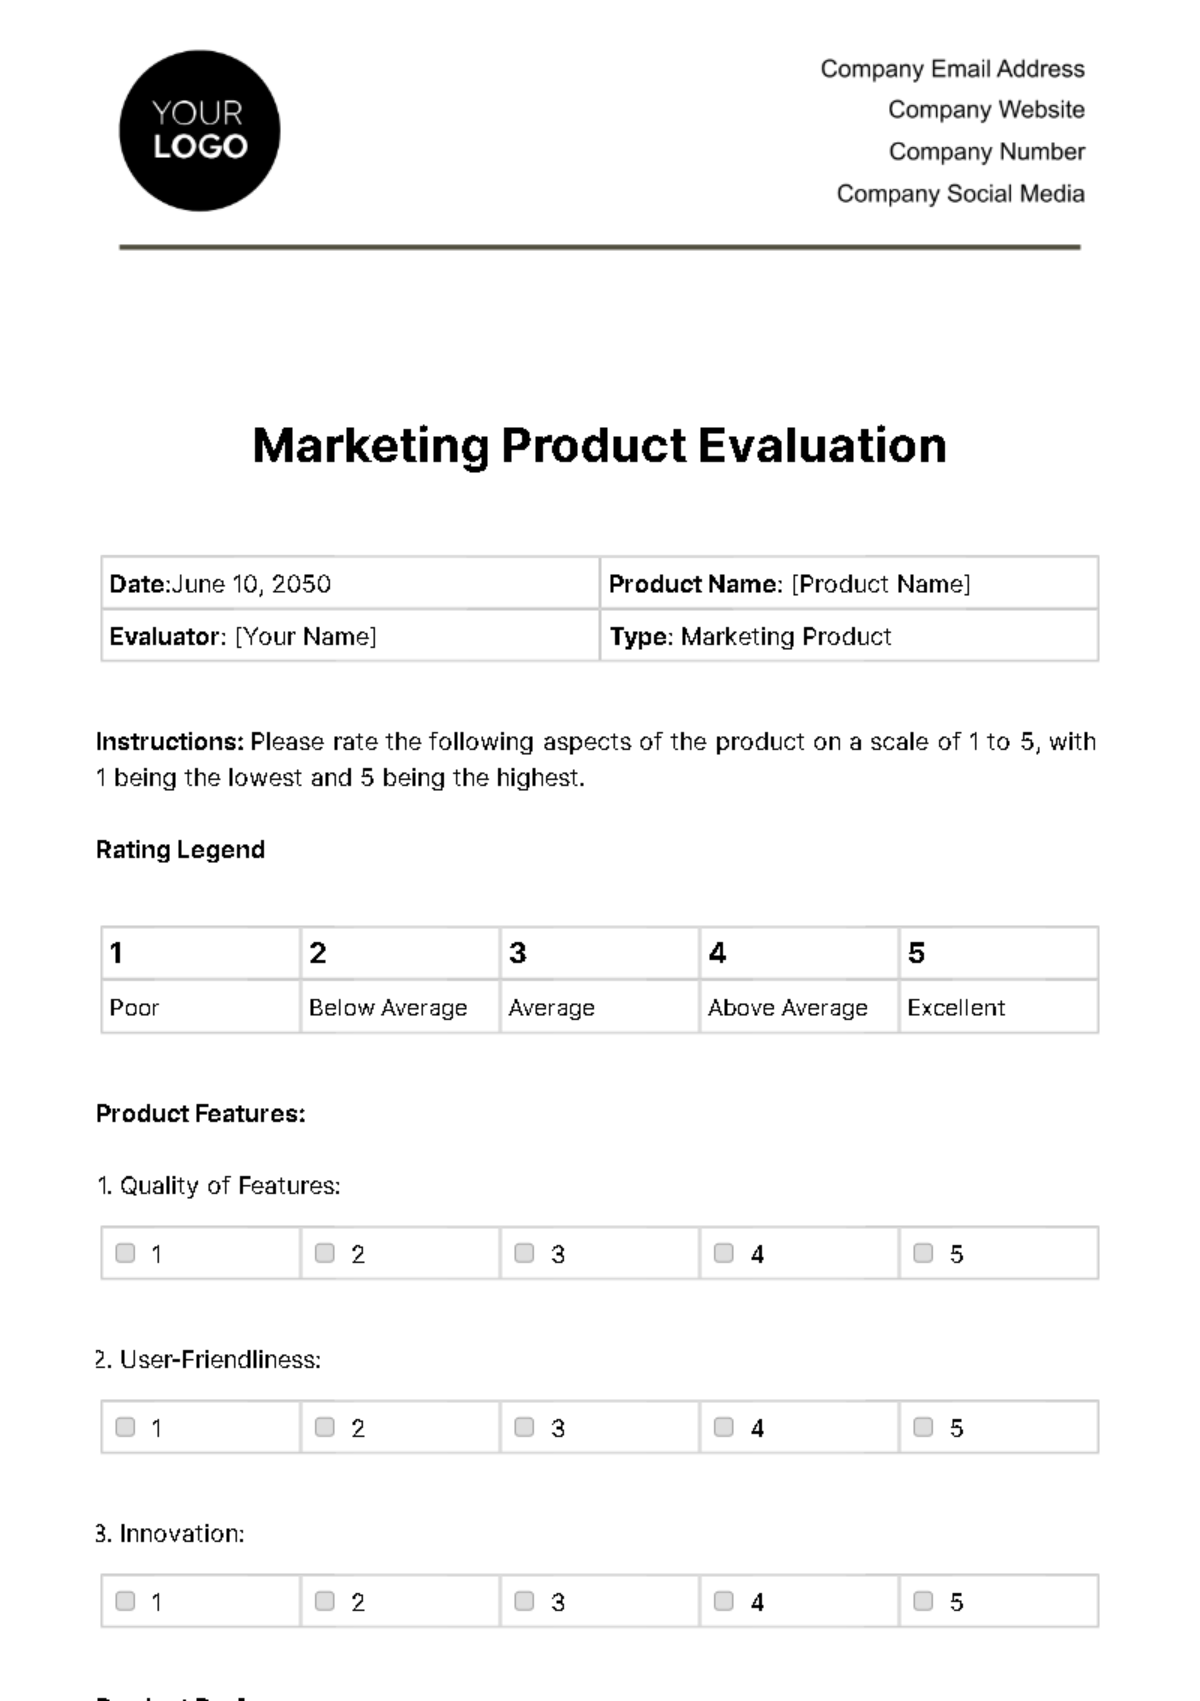 Marketing Product Evaluation Template